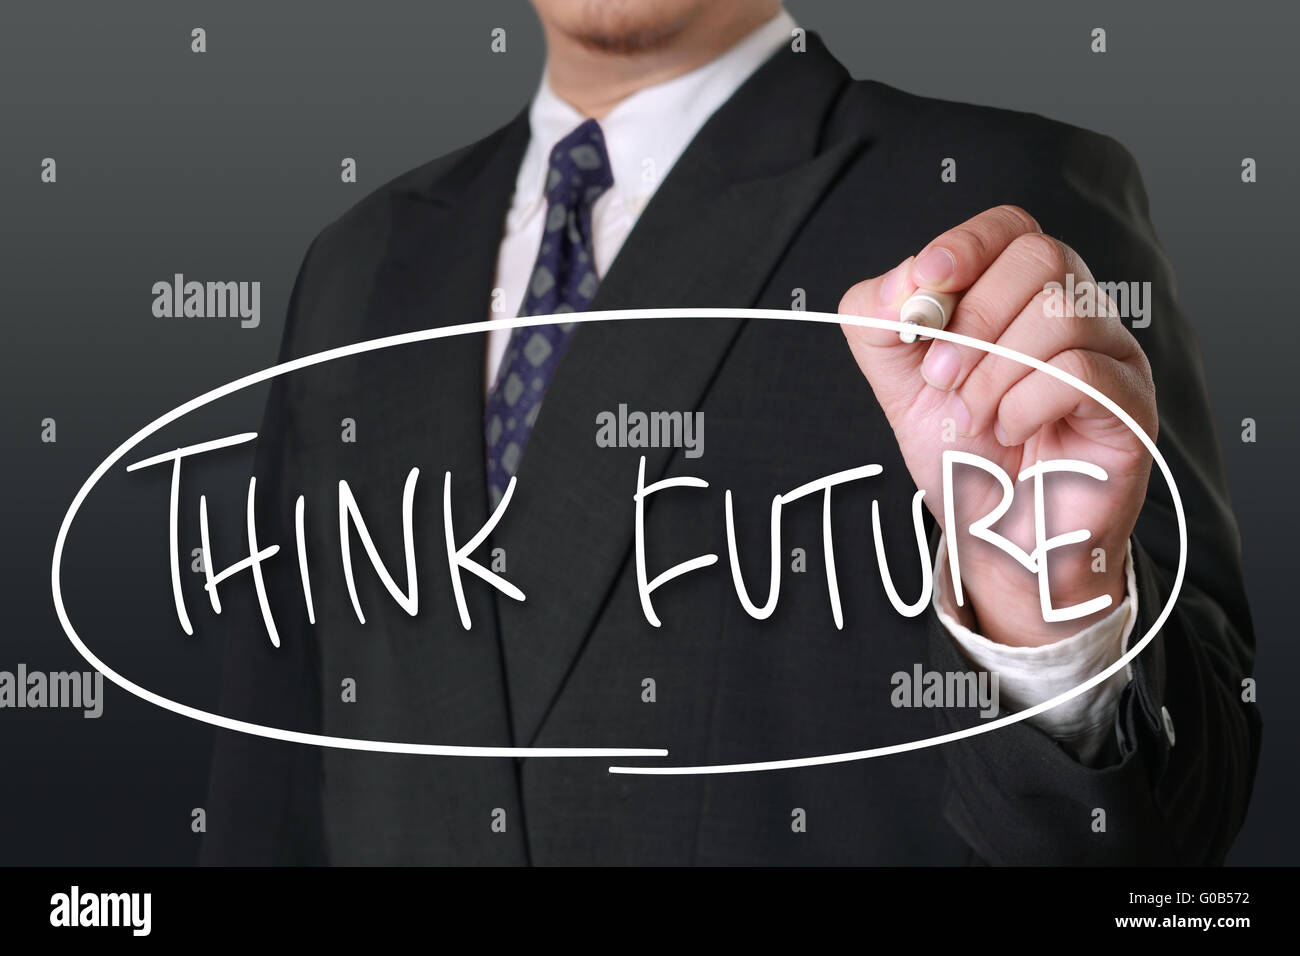 Motivational business concept, image of a businessman holding marker and write Think Future words Stock Photo